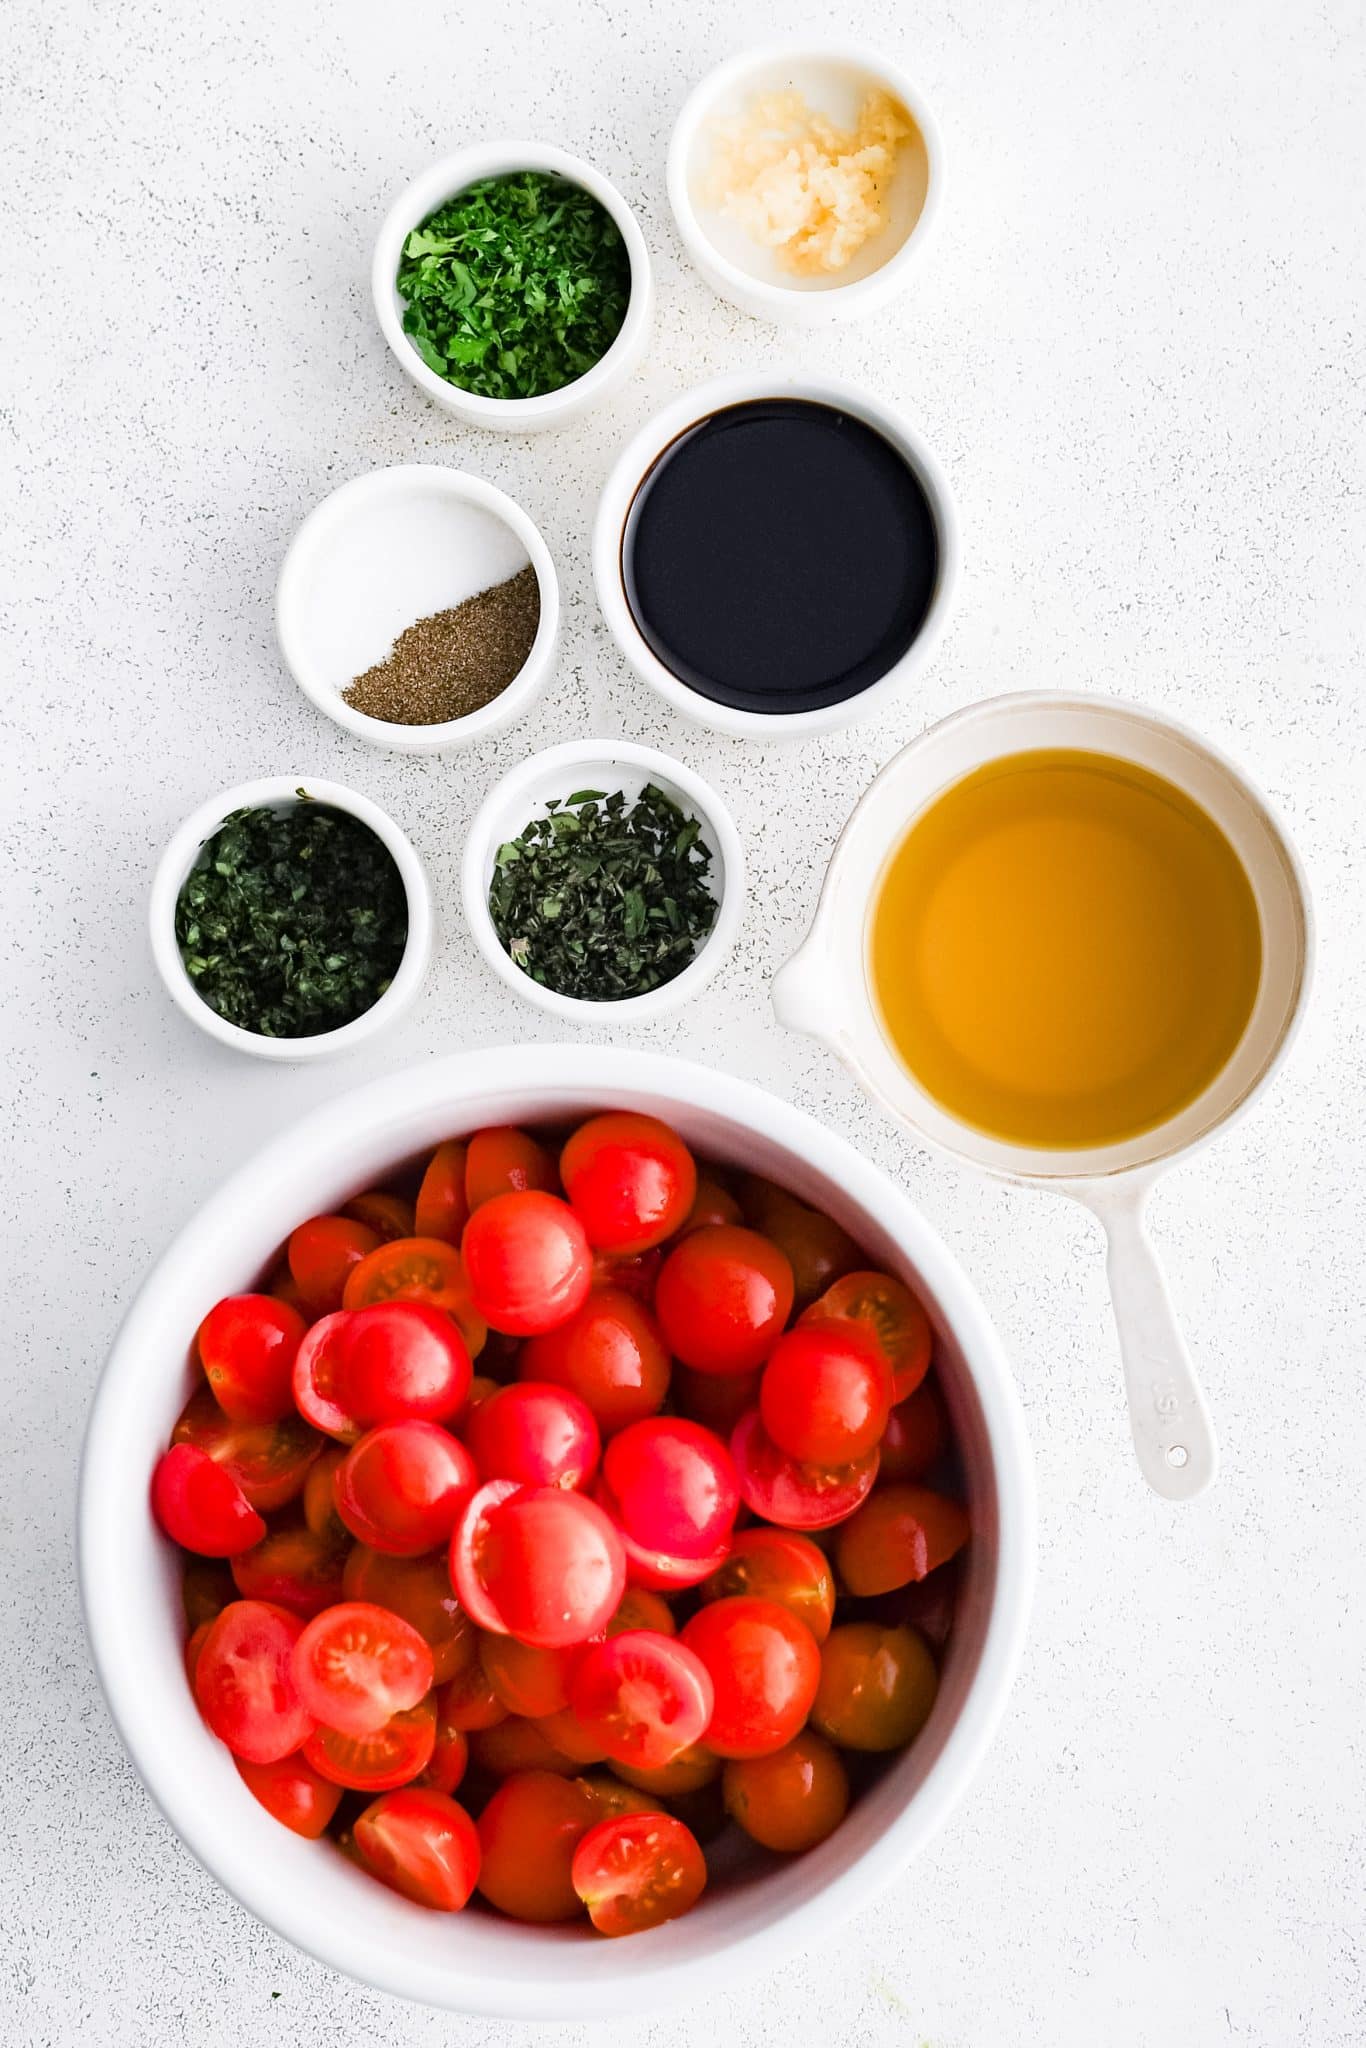 All of the ingredients for Cherry Tomato Salad presented in individual measuring cups and ramekins.